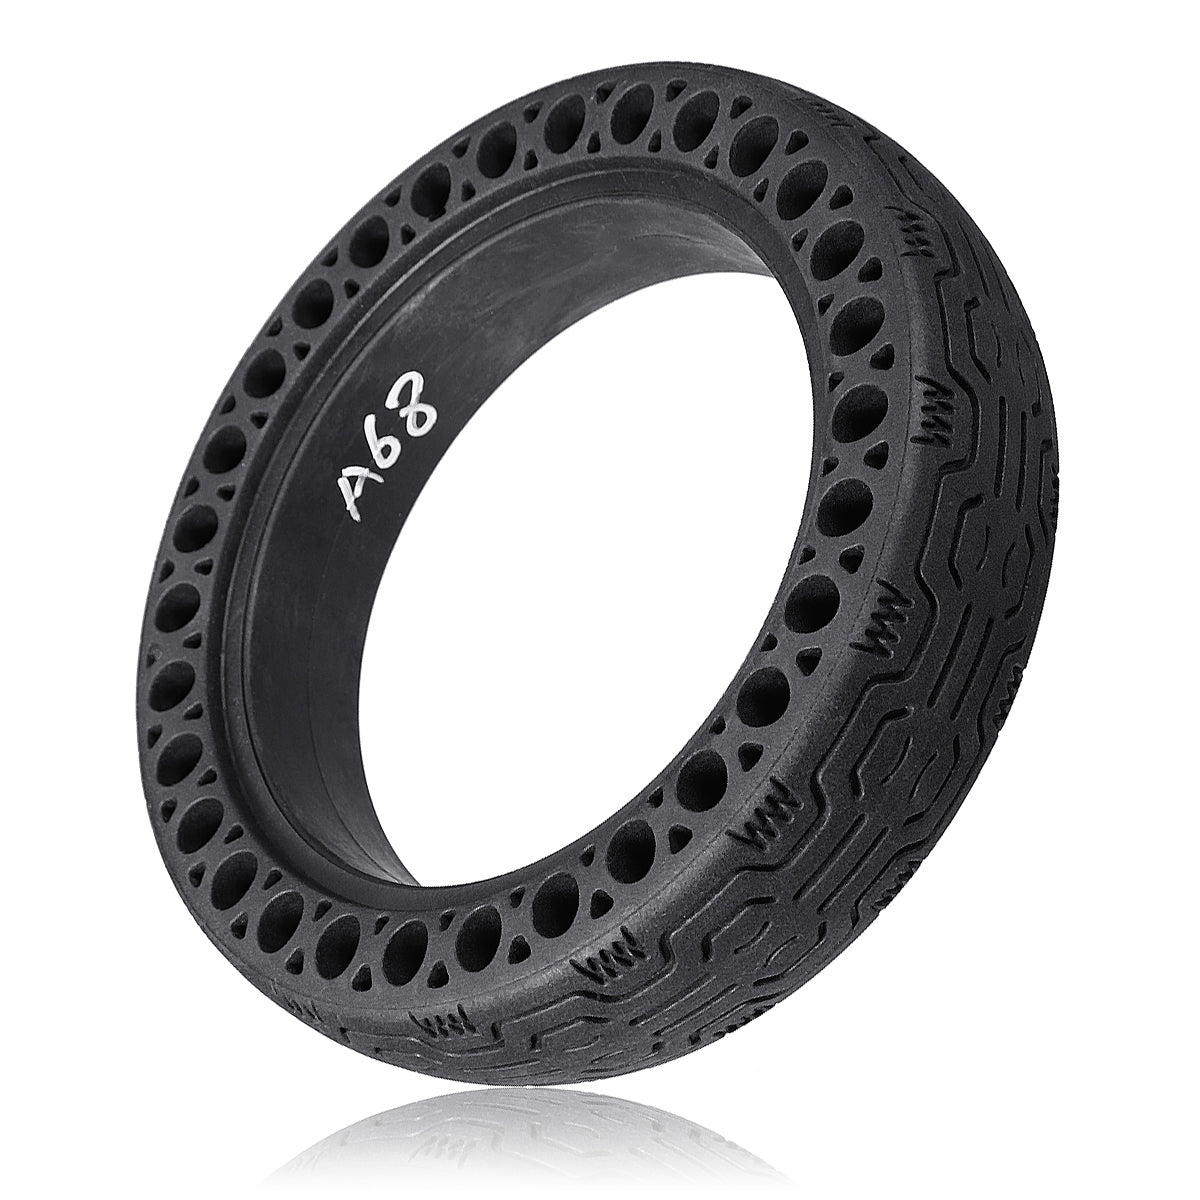 Anti-Explosion Solid Wheel Tyre Tire For M365 Ninebot Electric Scooter - Auto GoShop